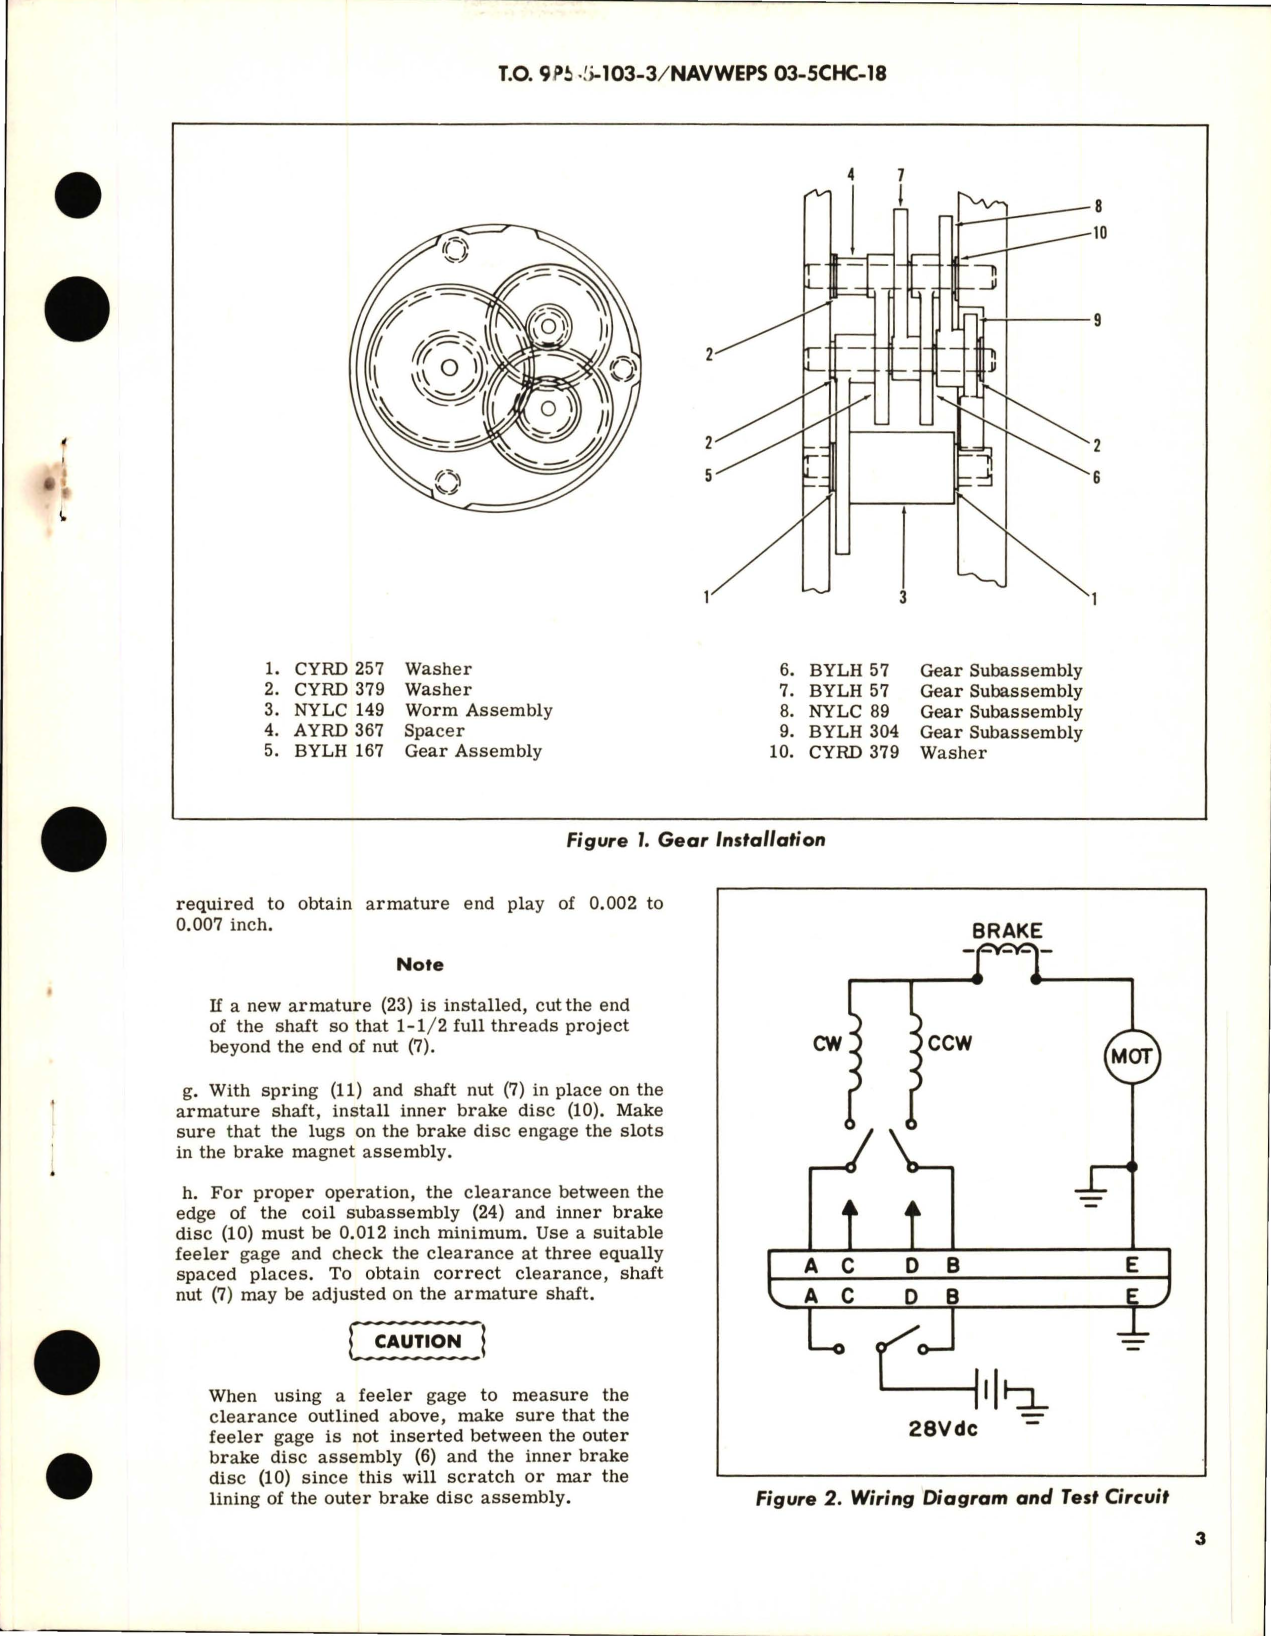 Sample page 5 from AirCorps Library document: Overhaul Instructions with Parts Breakdown for Valve and Actuator Assembly - Part BYLB 7506 